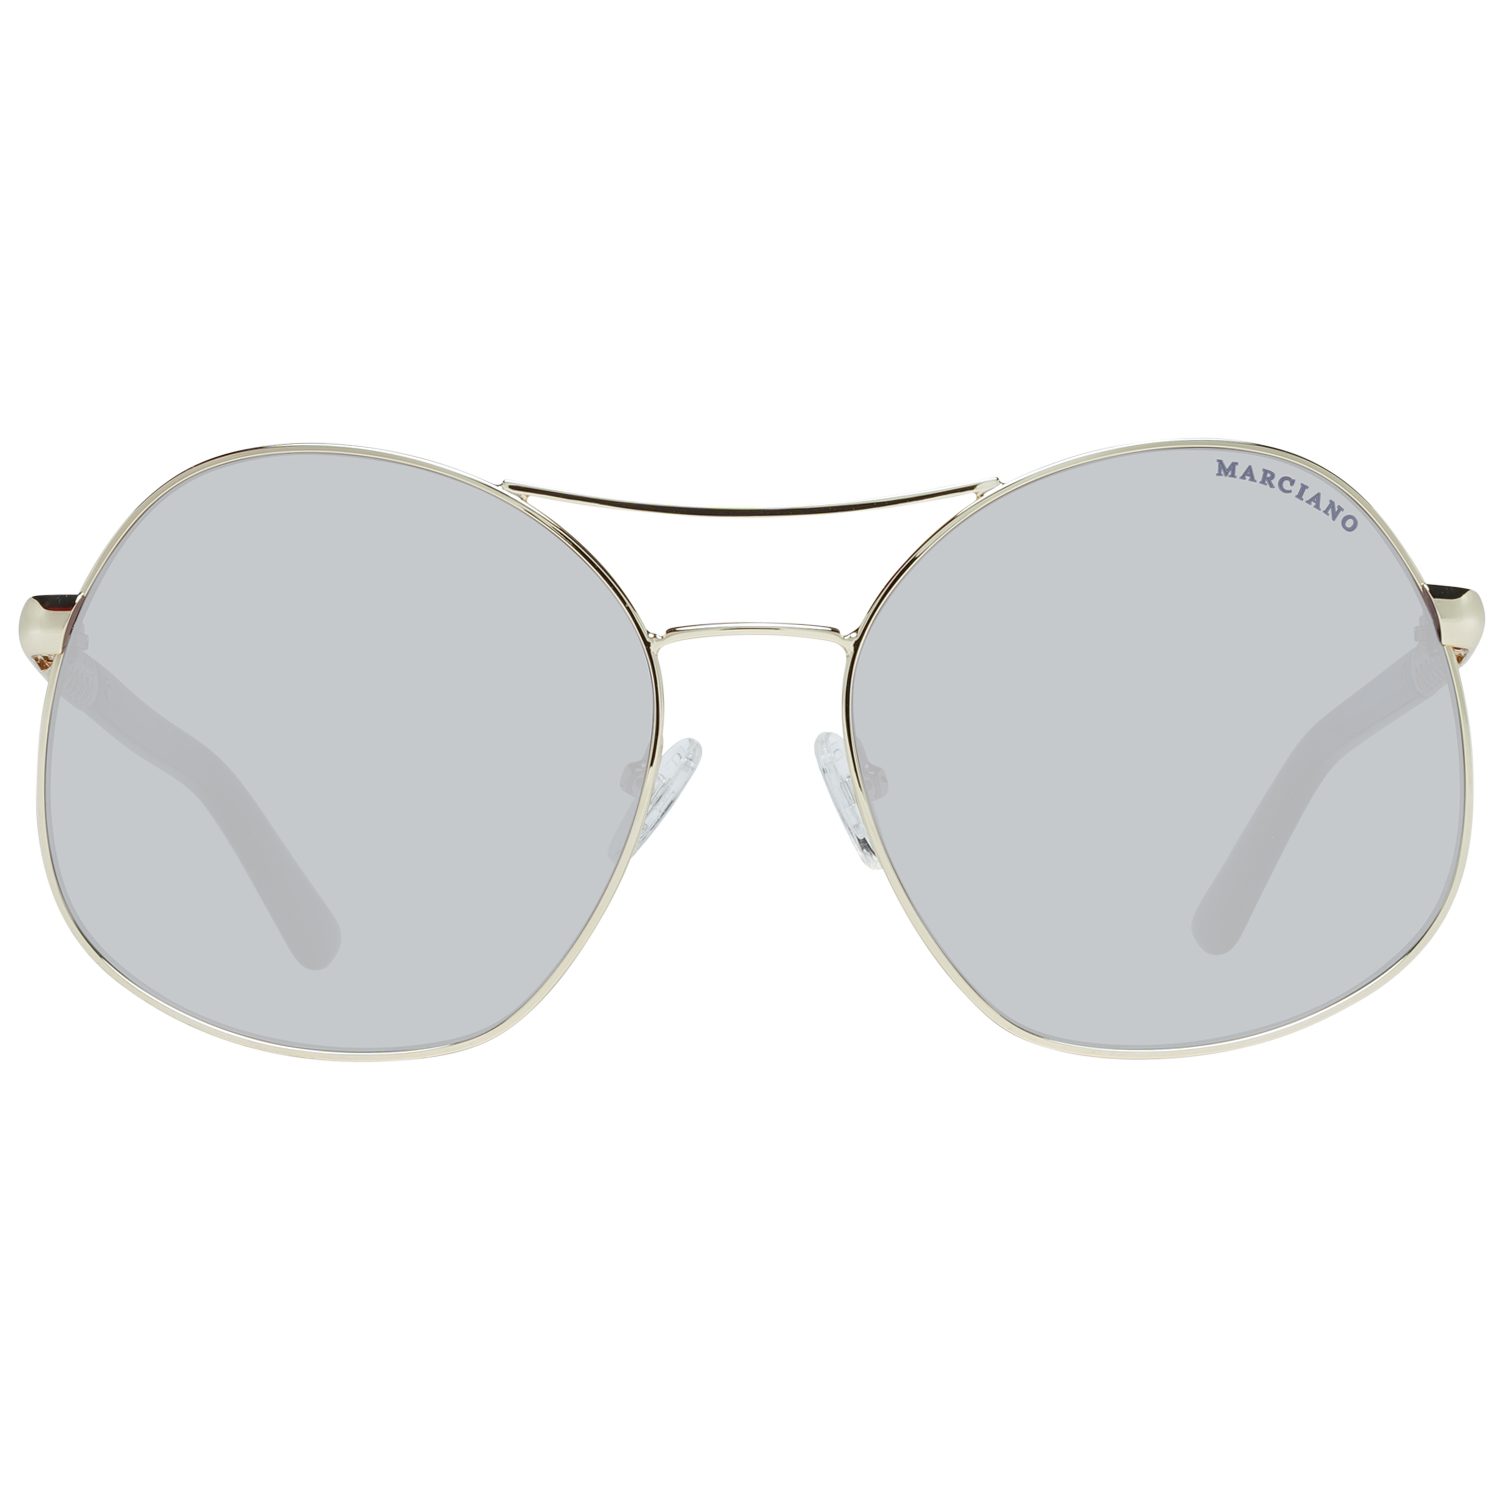 Marciano by Sonnenbrille Guess